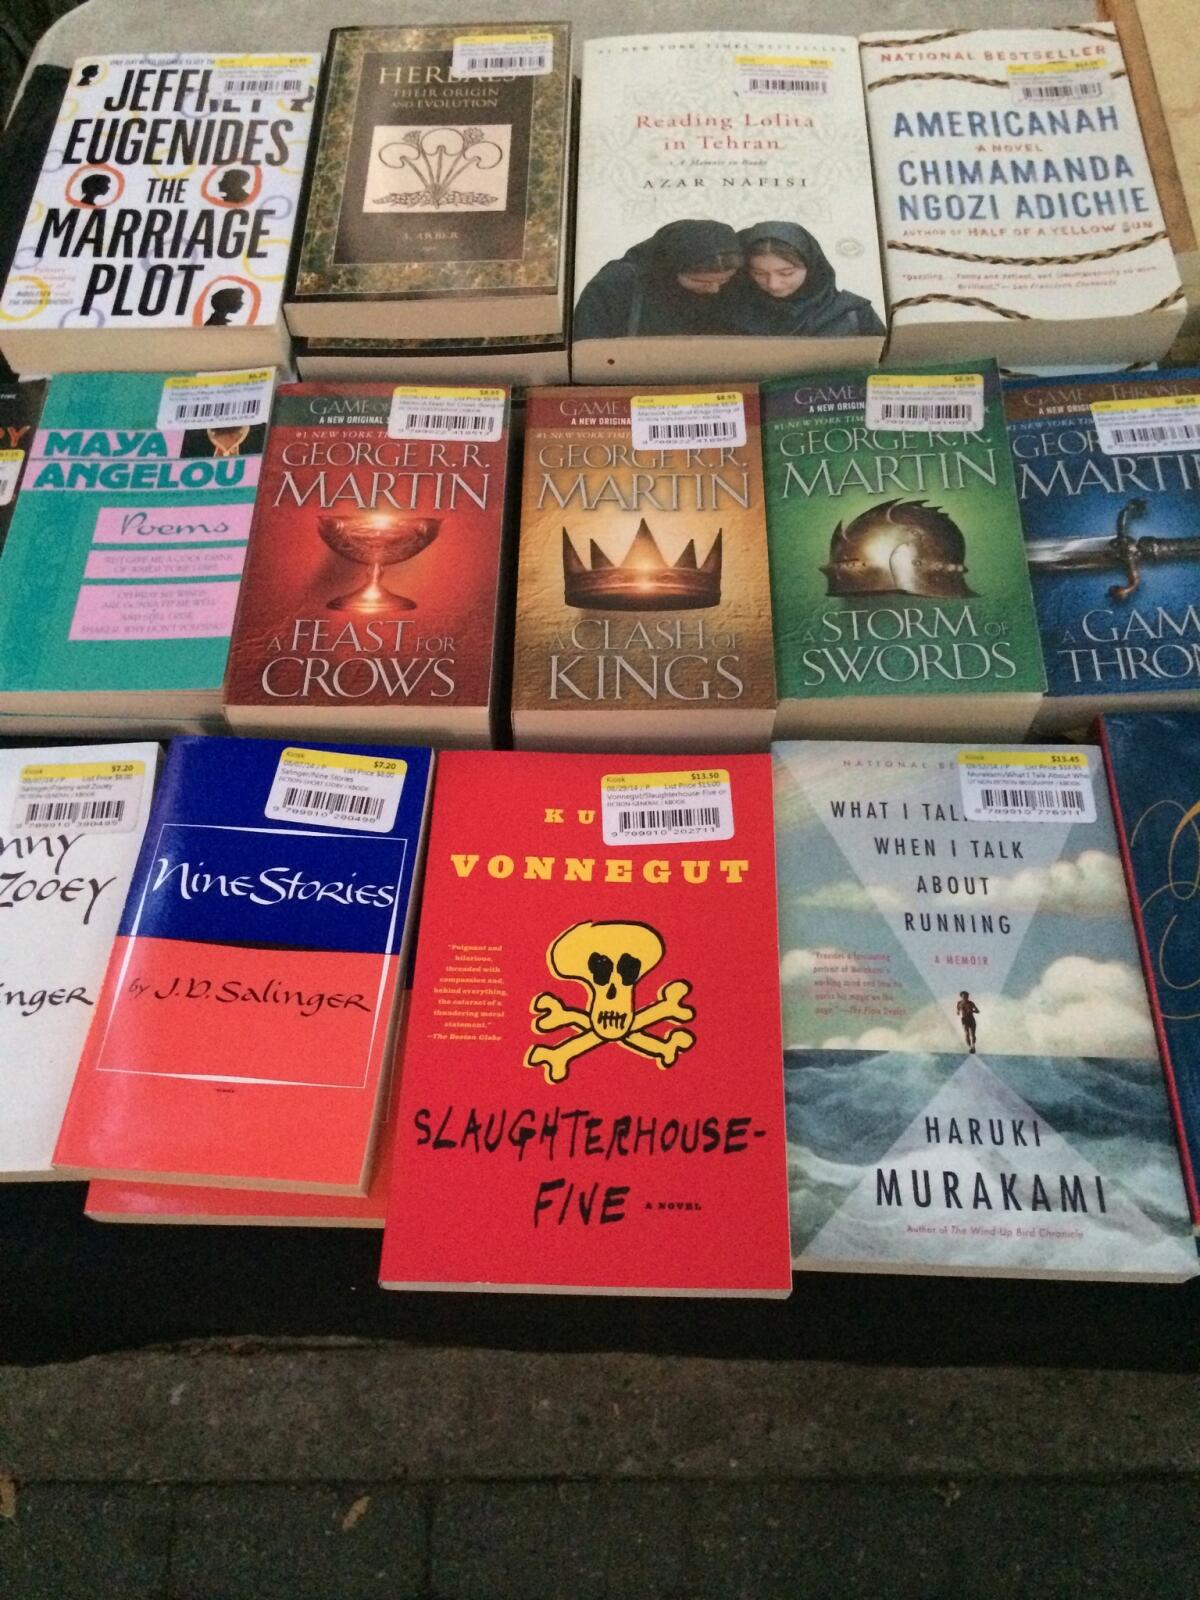 Books for sale at the Strand's book stall on Fifth Avenue in Manhattan.